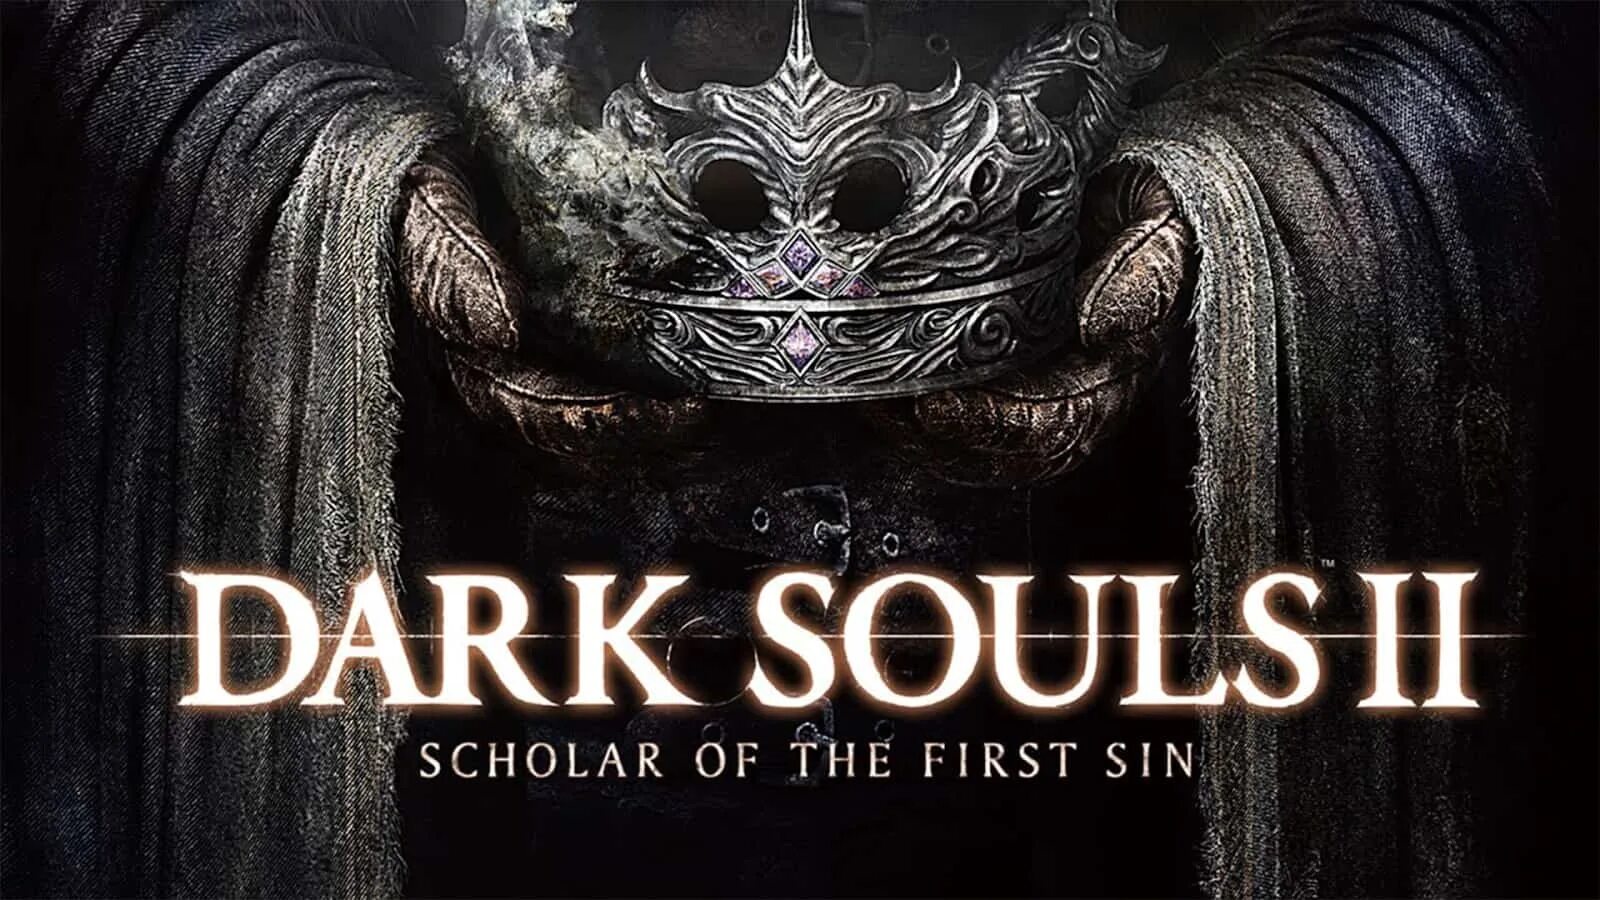 One of the four 1. Dark Souls II: Scholar of the first sin обложка. Dark Souls II - Scholar of the first sin Постер. Дарк соулс 2 школяр. Dark Souls 2 Scholar of the first sin обложка.